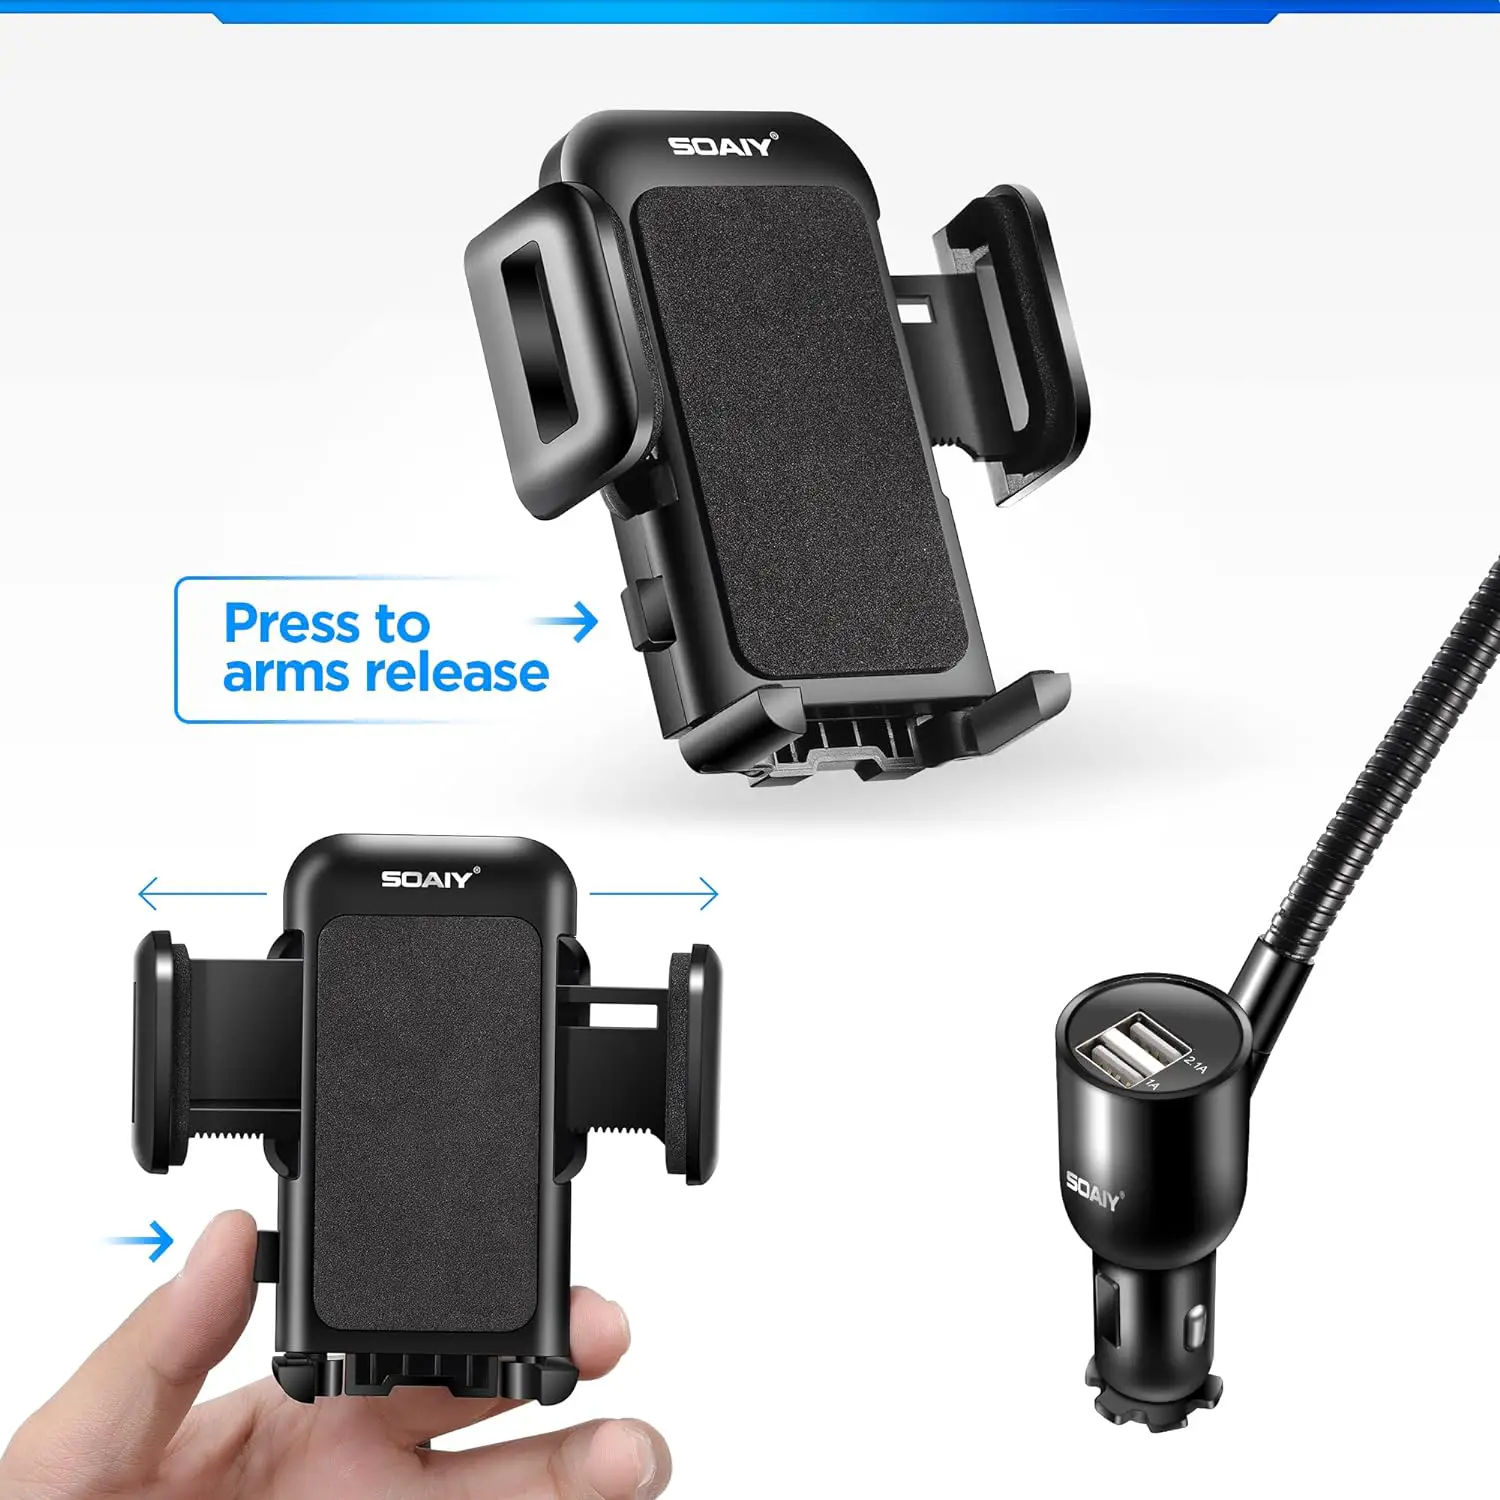 3-In-1 Multifunctional Car Mount + Car Charger + Voltage Detector, SOAIY Car Mount Charger Holder Cradle w/Dual USB 3.1A Charger, Display Voltage Current for iPhone7 6s 6 5s Samsung S7 S6 S5